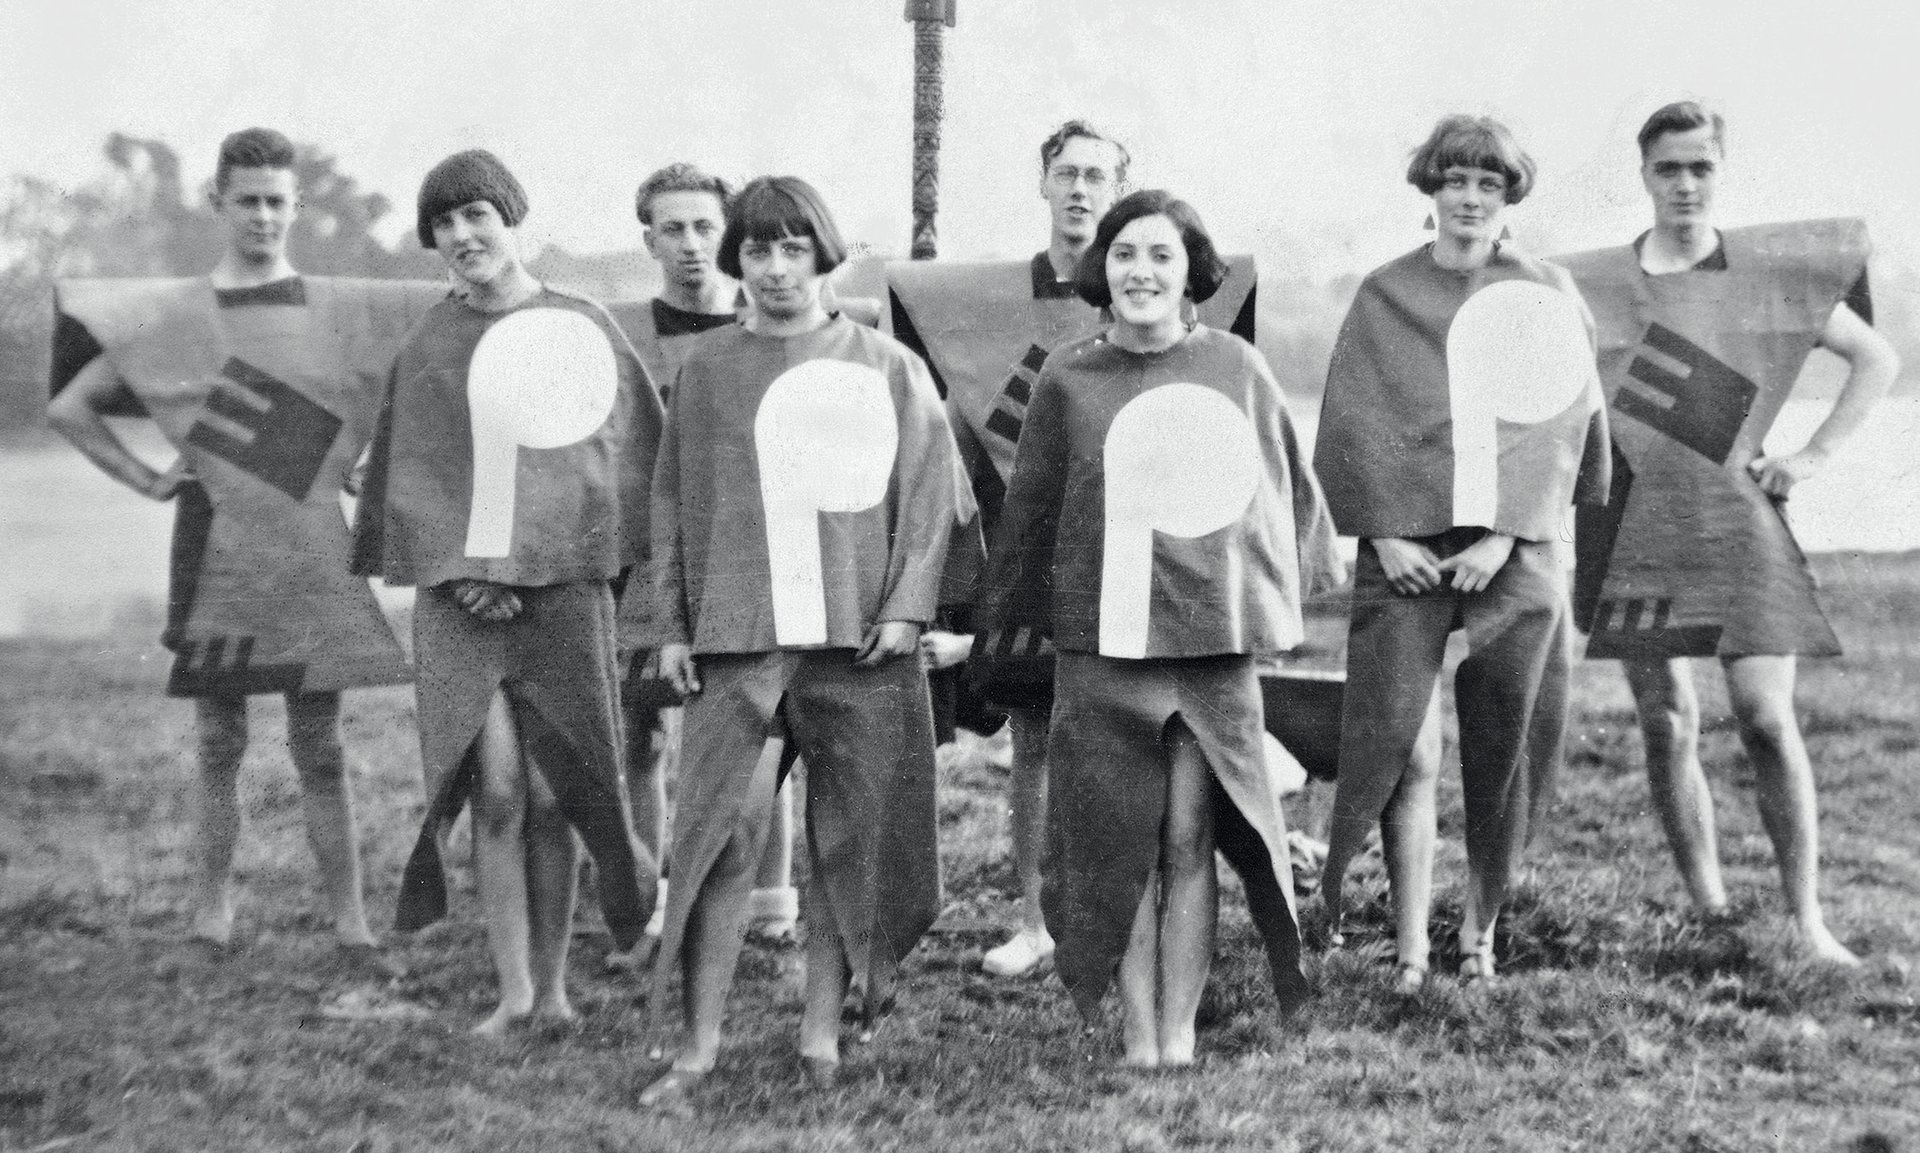 Angus McBean. Body of Gleemen and Gleemaidens at Gleemote (a Kibbo Kift Festival) 1929. Stanley Dixon Collection, thanks to Gill Dixon. Courtesy of Tim Turner.